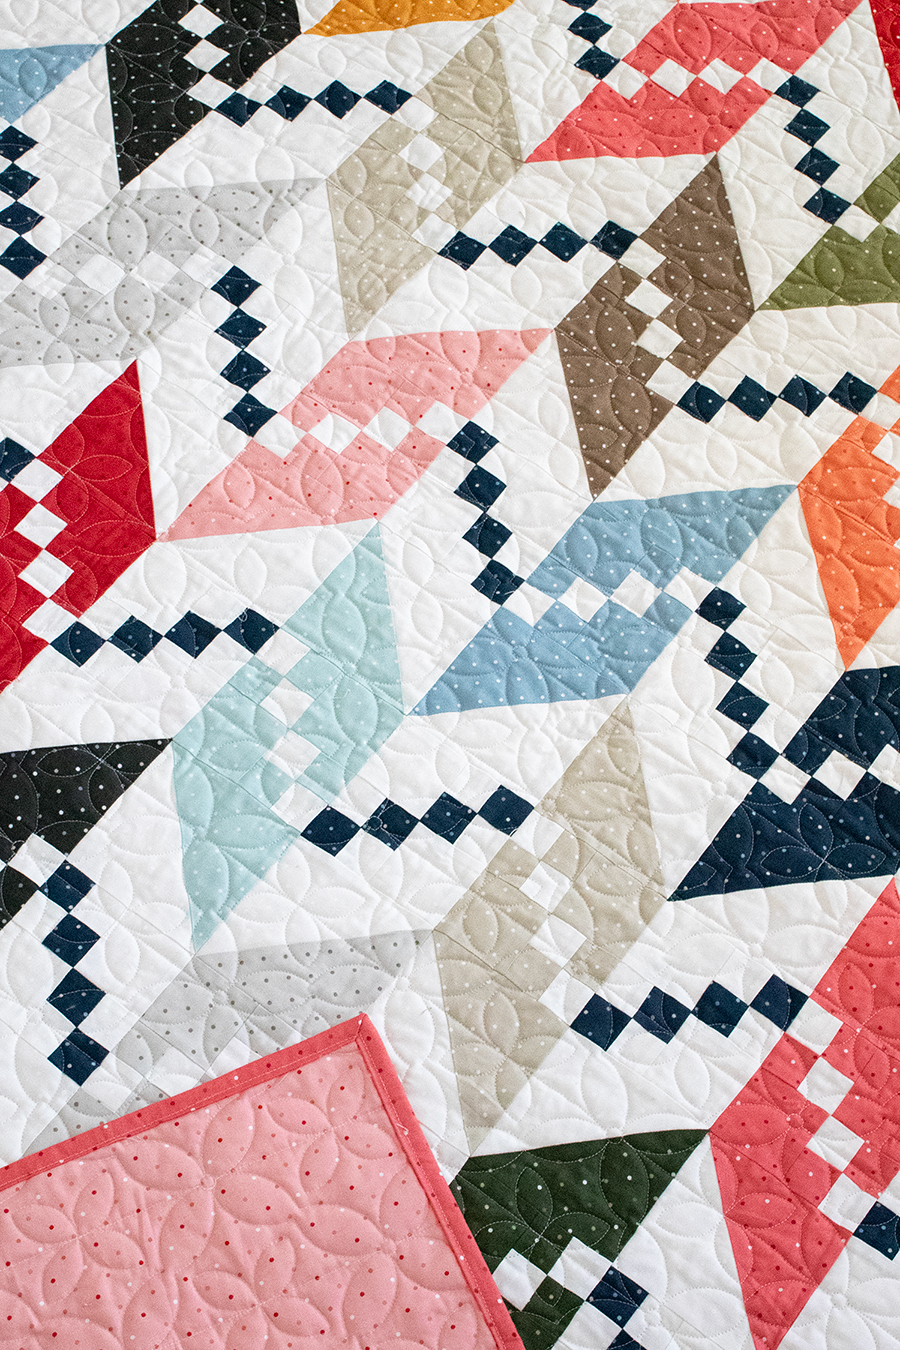 Persnickety knit herringbone quilt design. Make it with a layer cake or charm packs. Fabric is Magic Dot by Lella Boutique for Moda Fabrics.